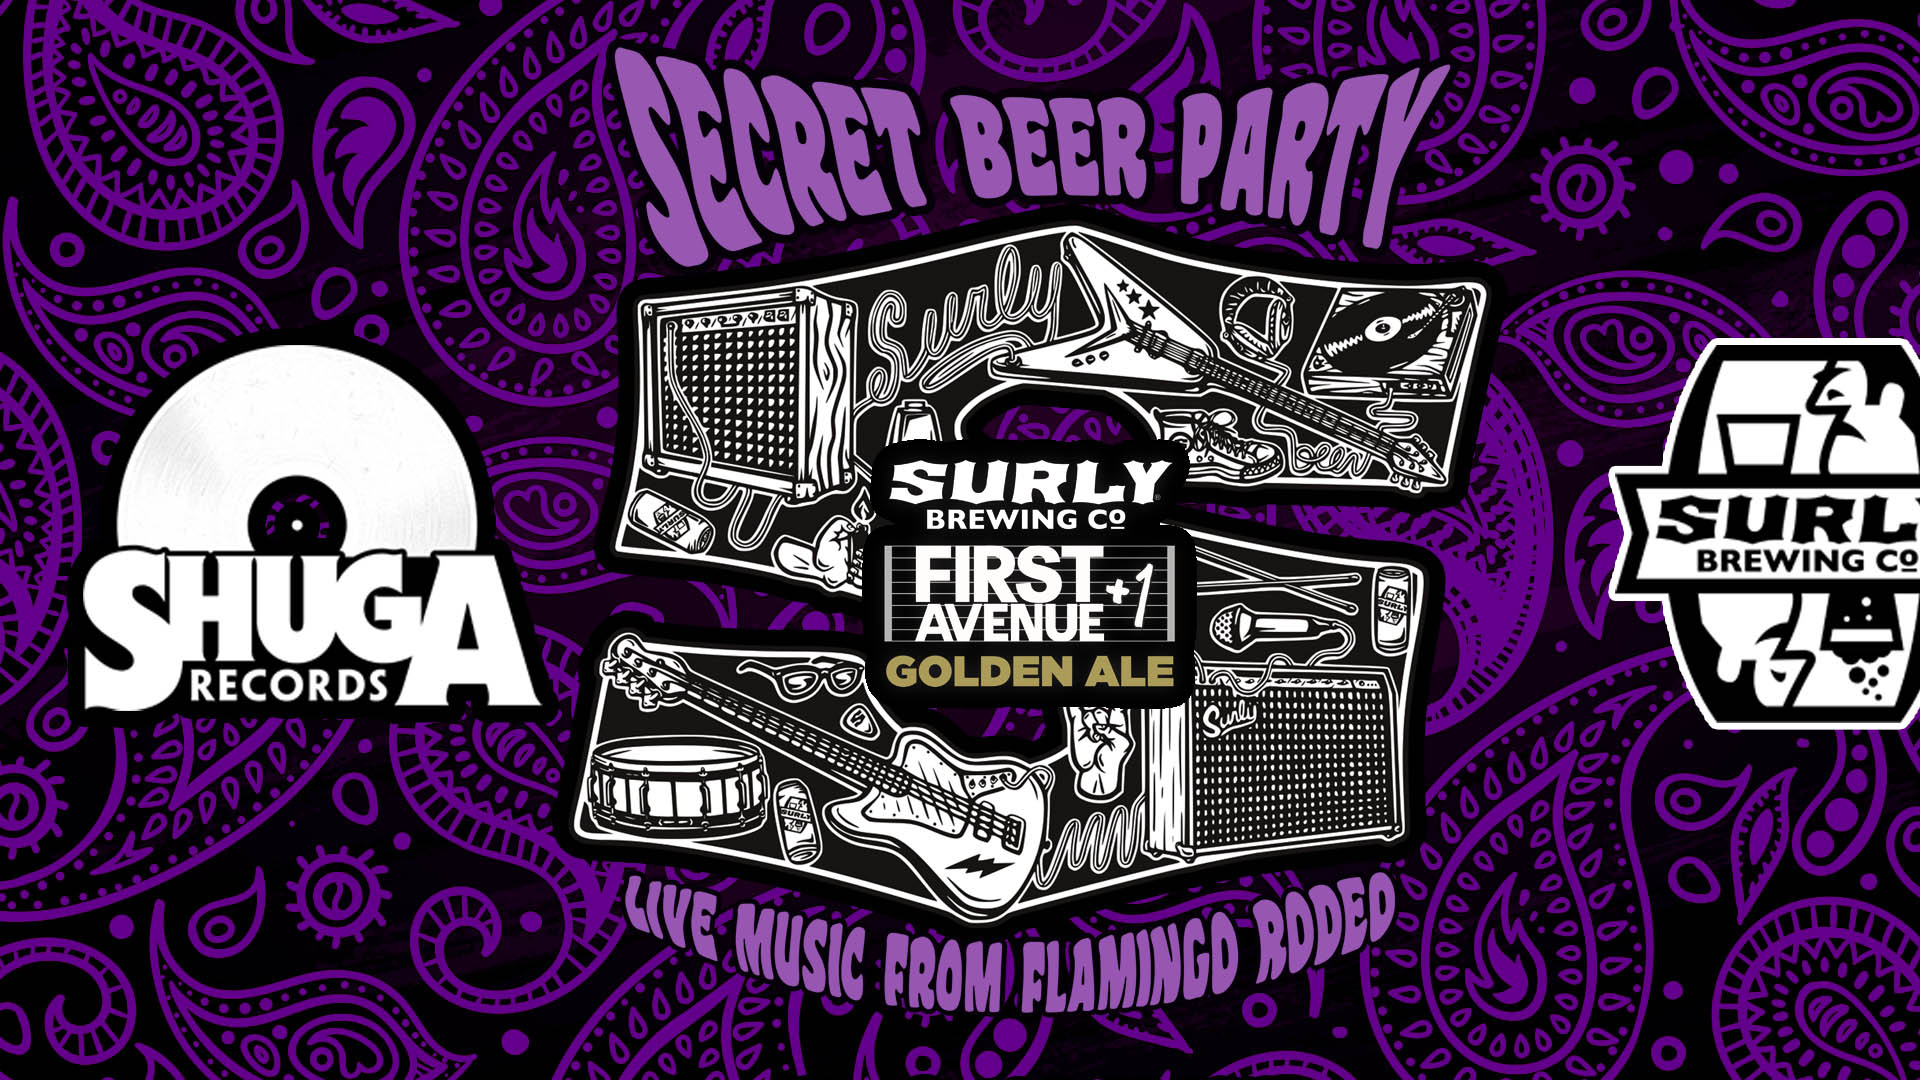 Surly Secret Beer Party